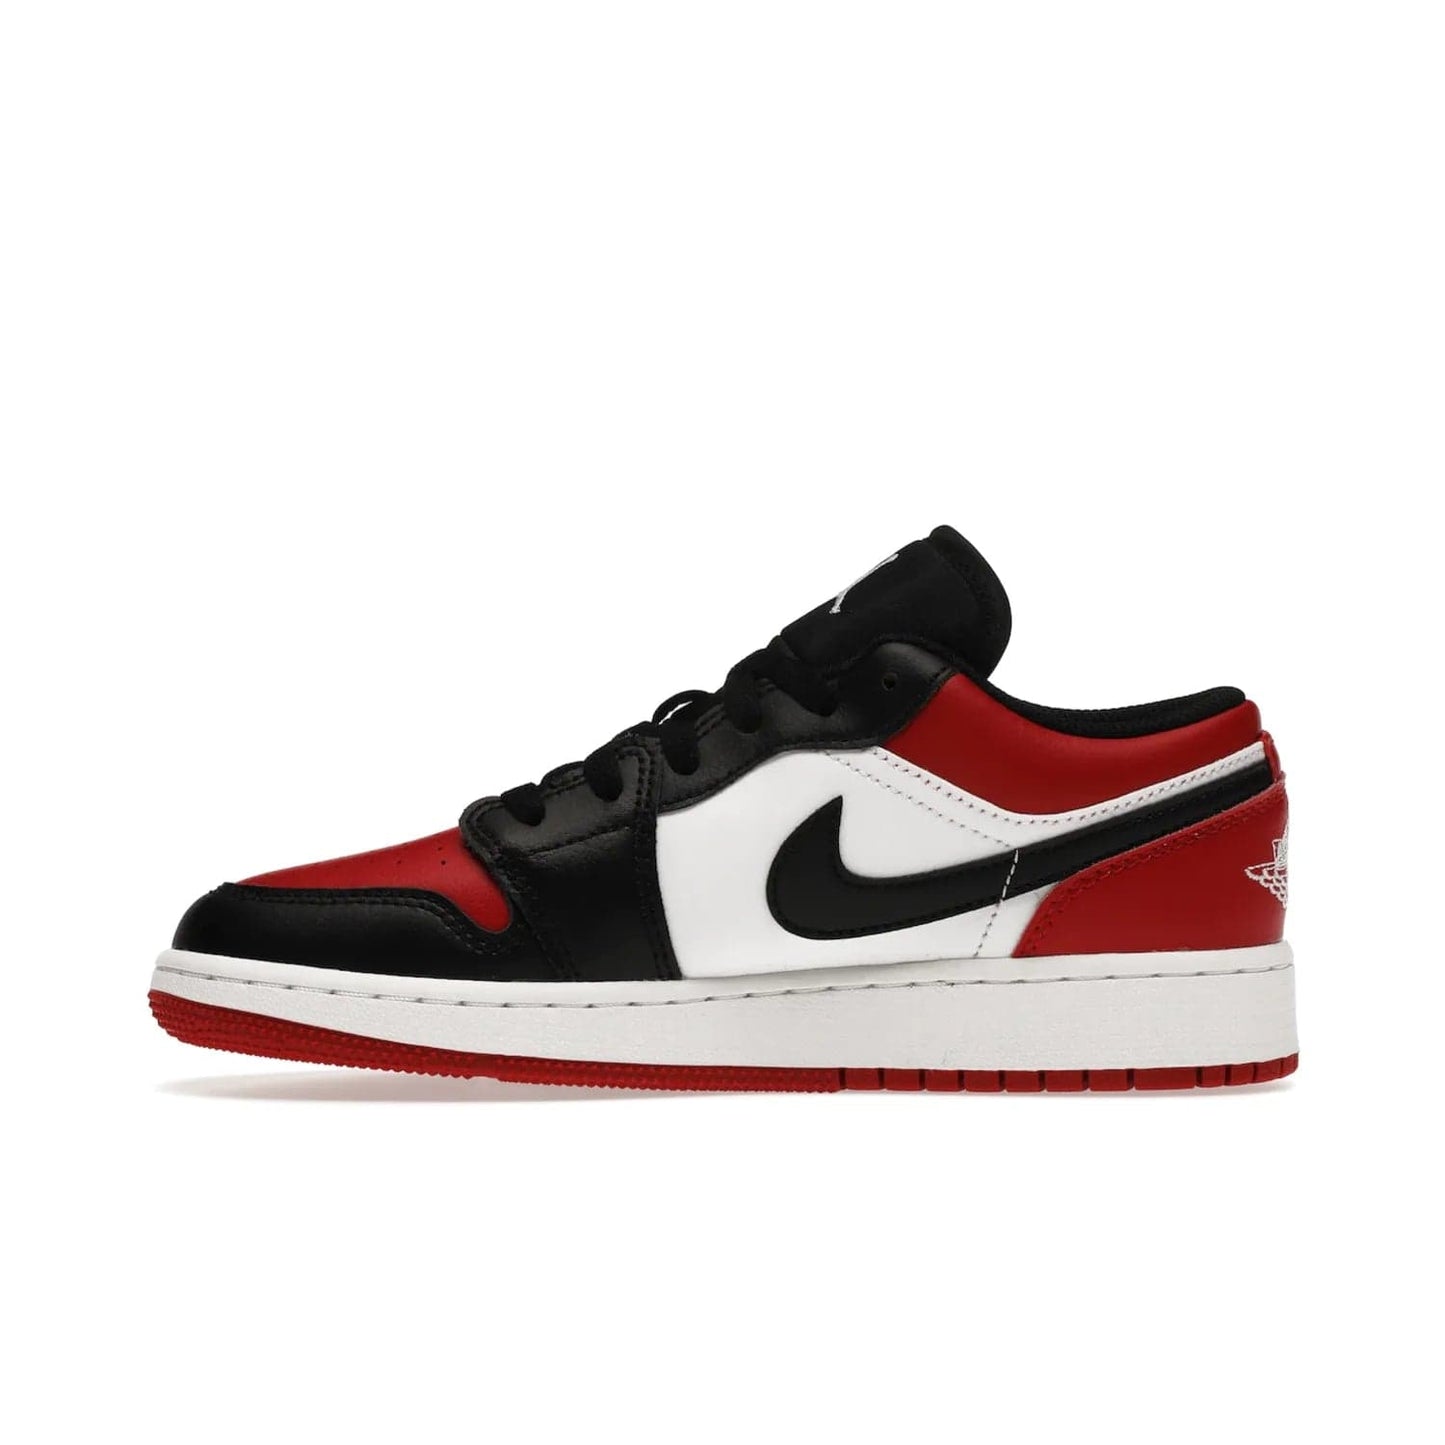 Jordan 1 Low Bred Toe (GS) - Image 19 - Only at www.BallersClubKickz.com - #
Iconic sneaker from Jordan brand with classic colorway, unique detailing & Air Jordan Wings logo. Step into the shoes of the greats with the Jordan 1 Low Bred Toe GS!